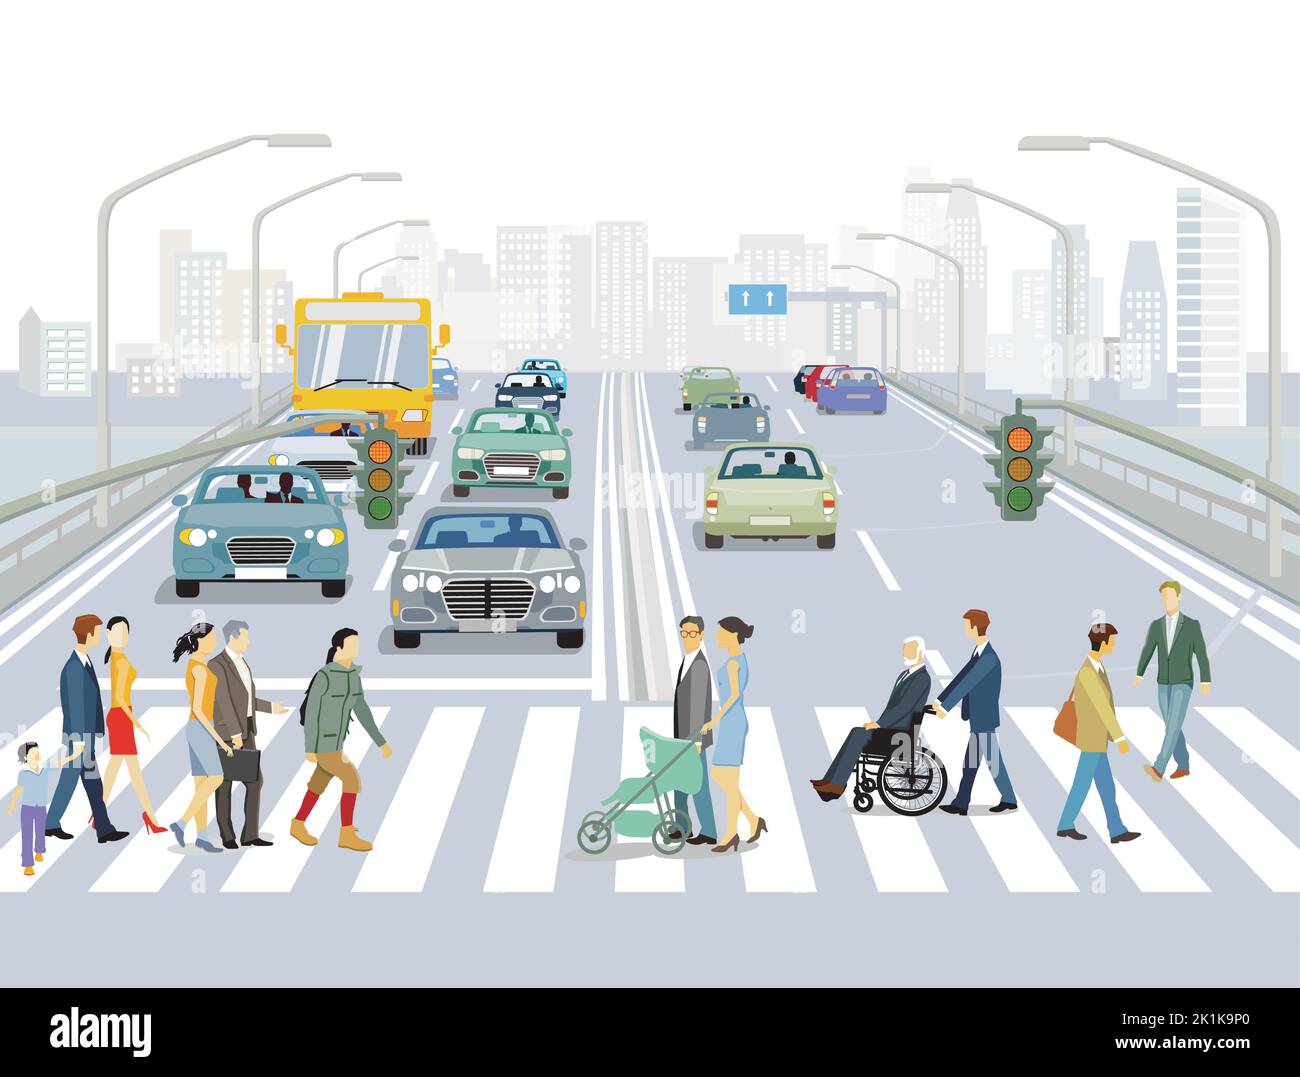 Road traffic and cyclists with pedestrians on the pedestrian crossing, illustration Stock Vector